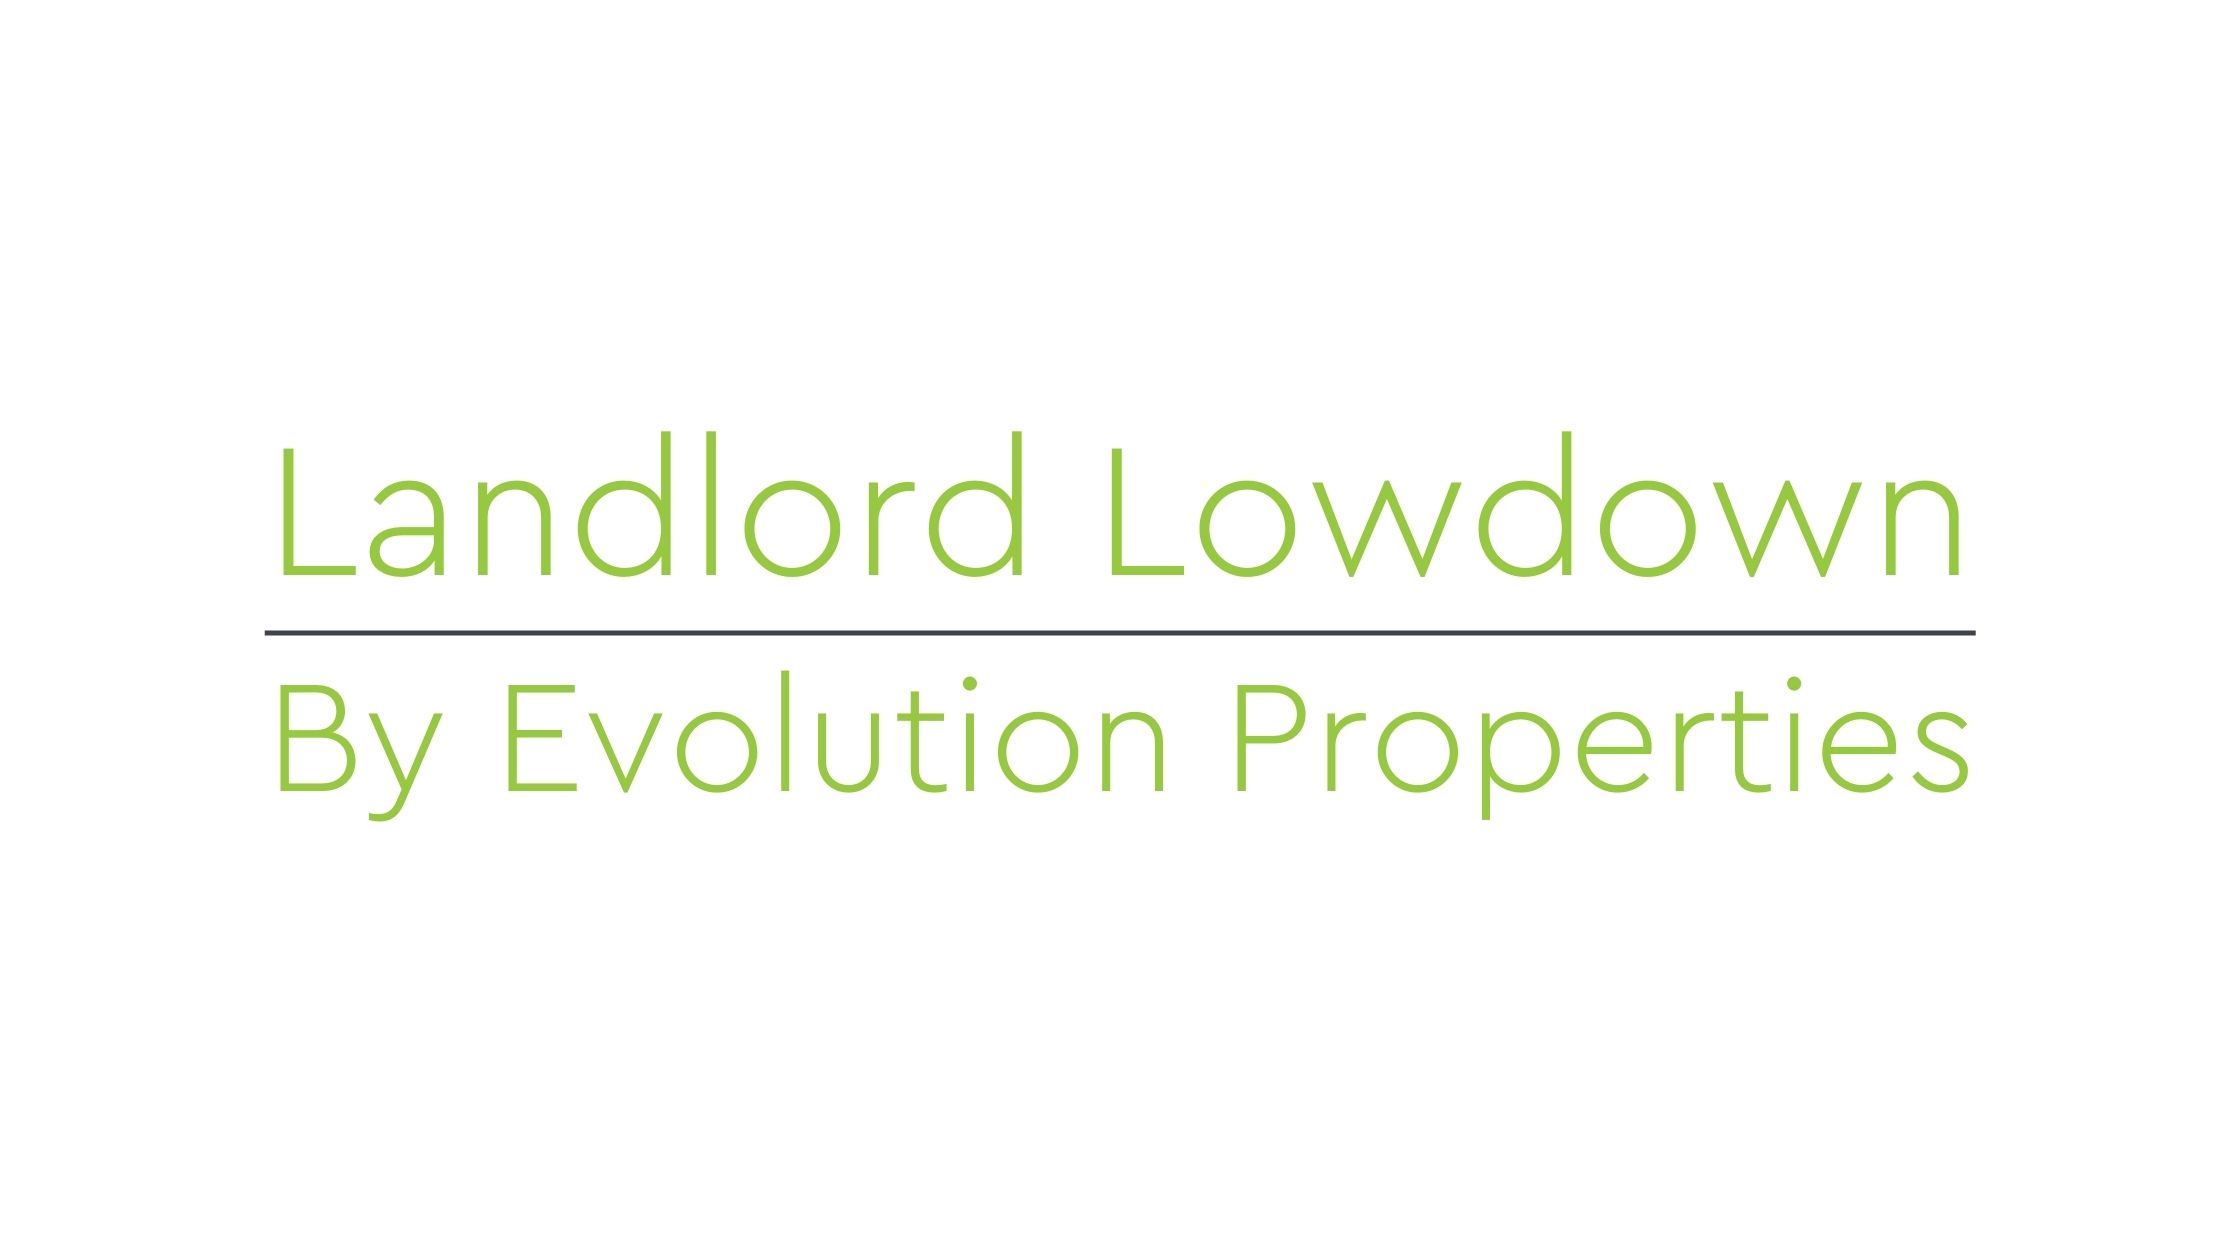 Landlord Lowdown - Leasehold and Freehold Reforms.